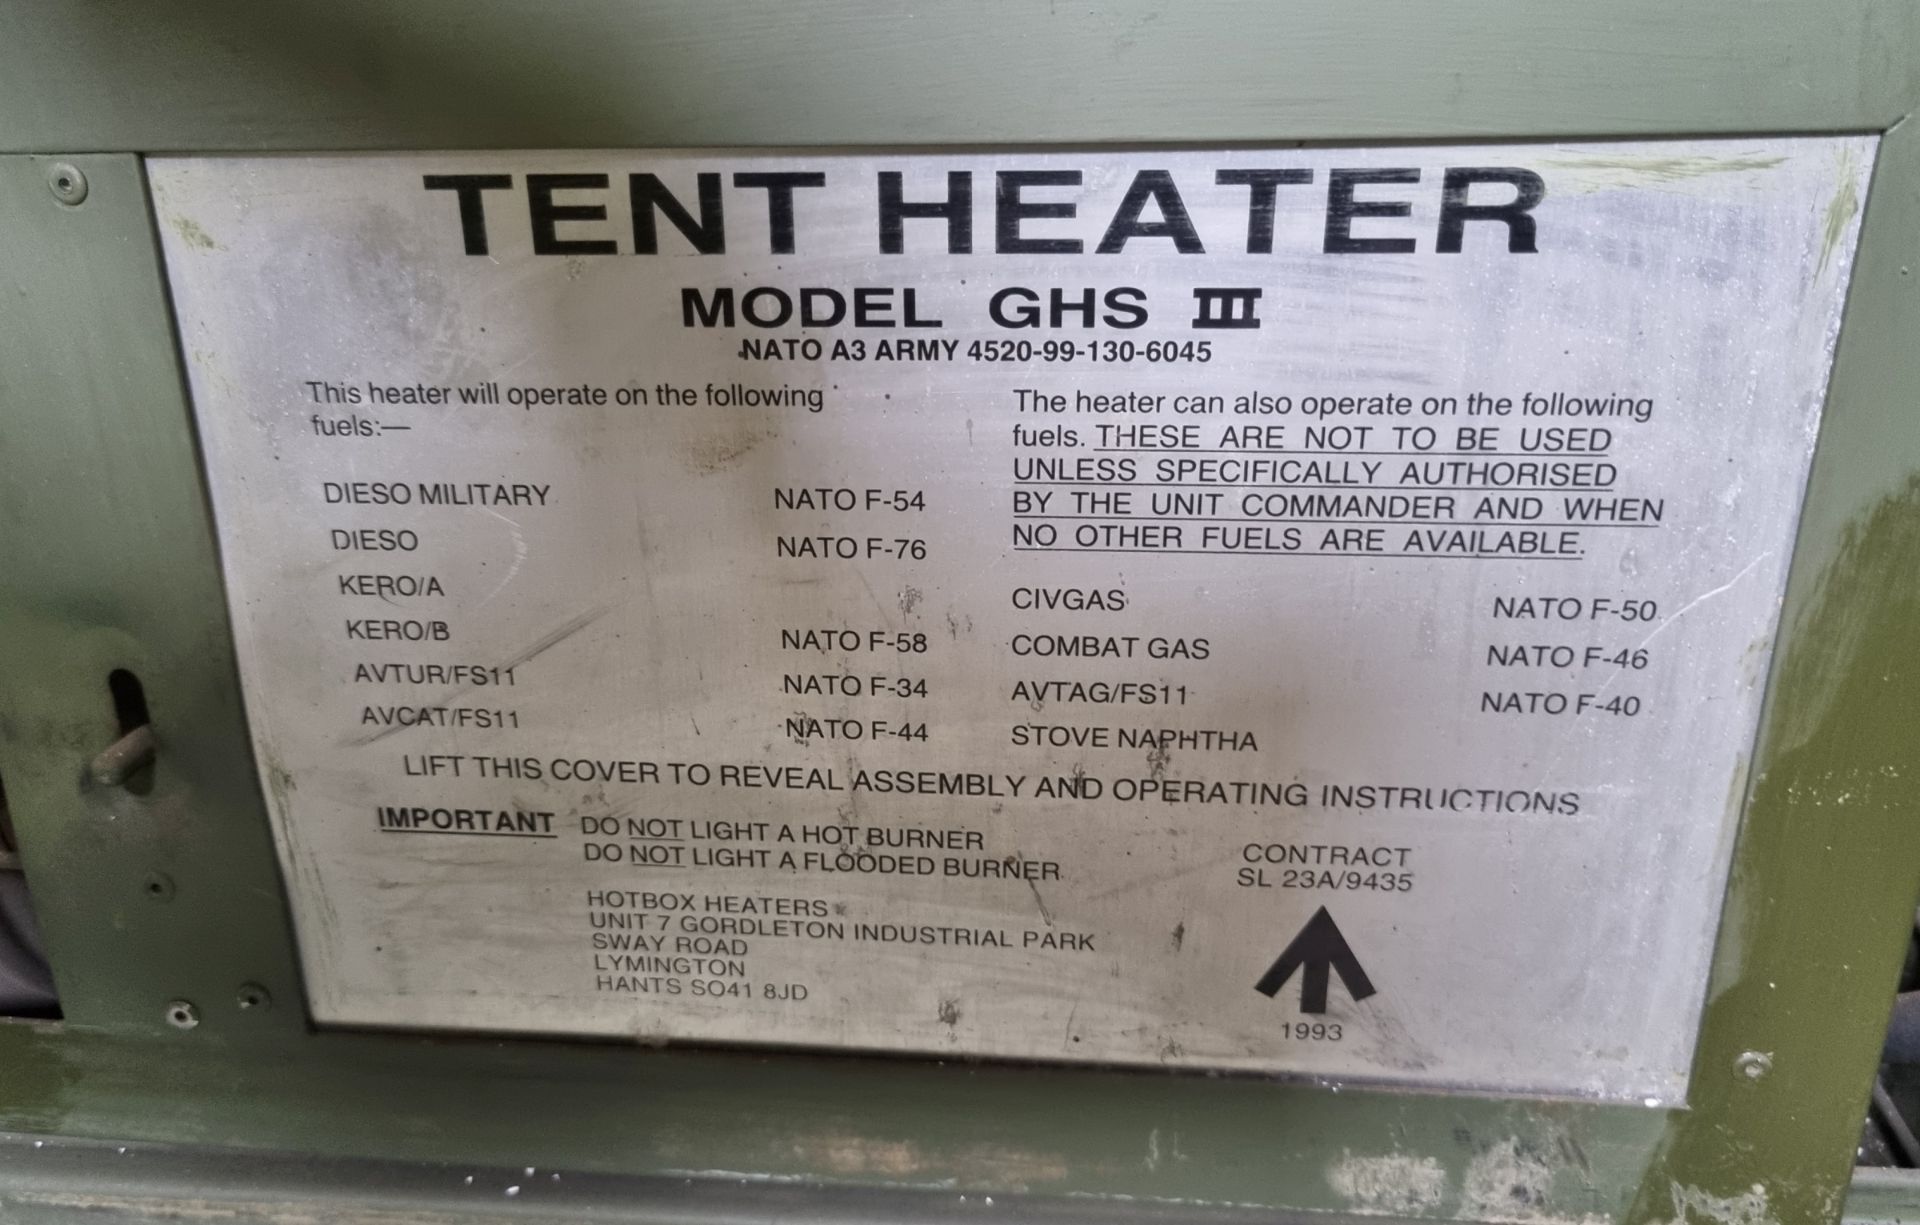 Tent Heater Model GHS 3 with accessories - see pictures for details - Image 7 of 11